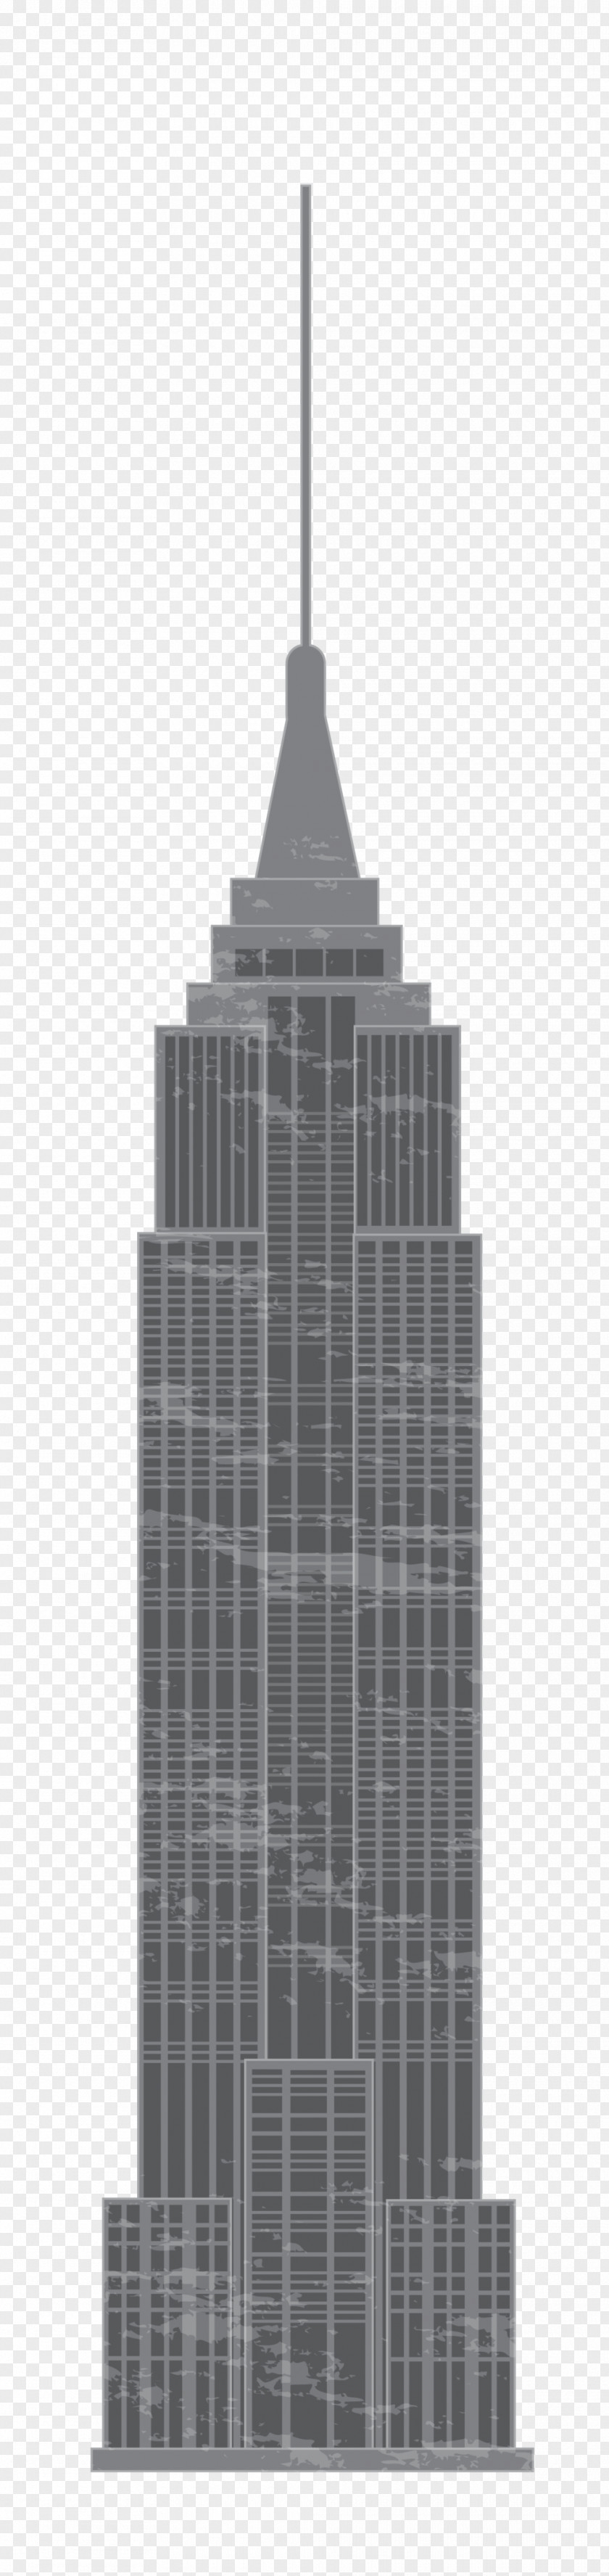 Empire State Buildin Architecture Graphic Designer Building Pattern PNG